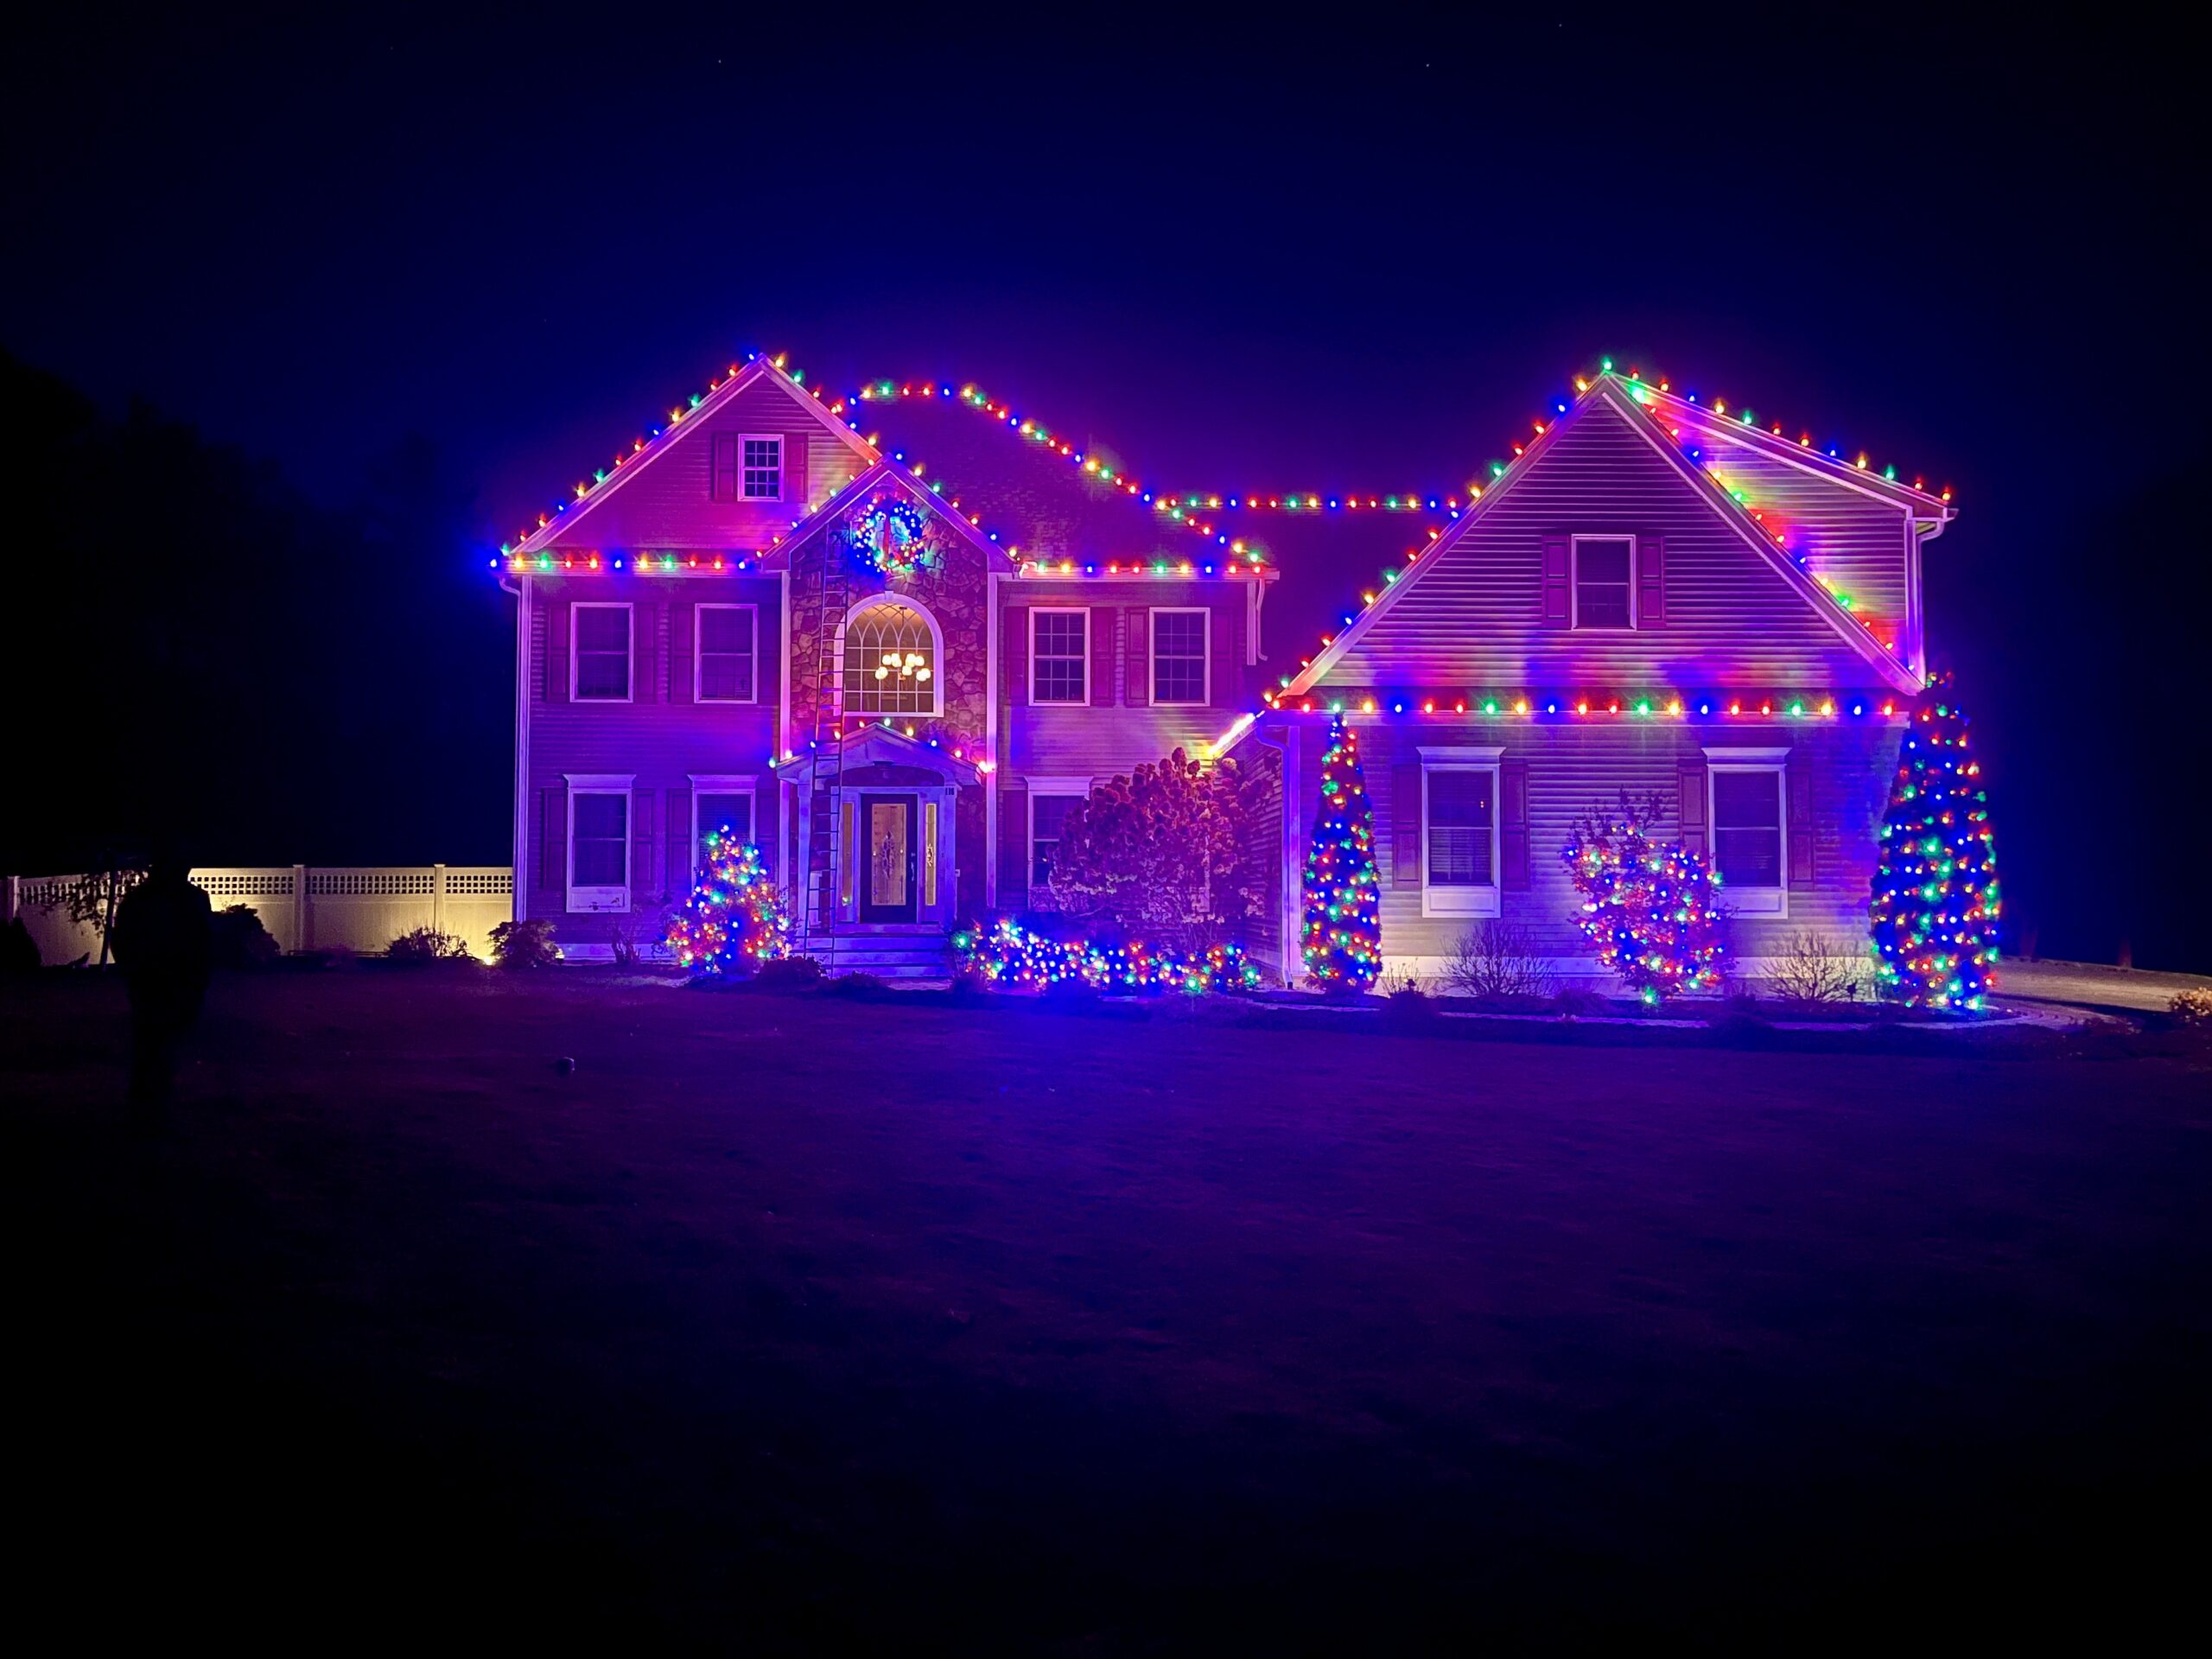 Colorful holiday lighting services Andover, North Andover, Tewksbury, and more!